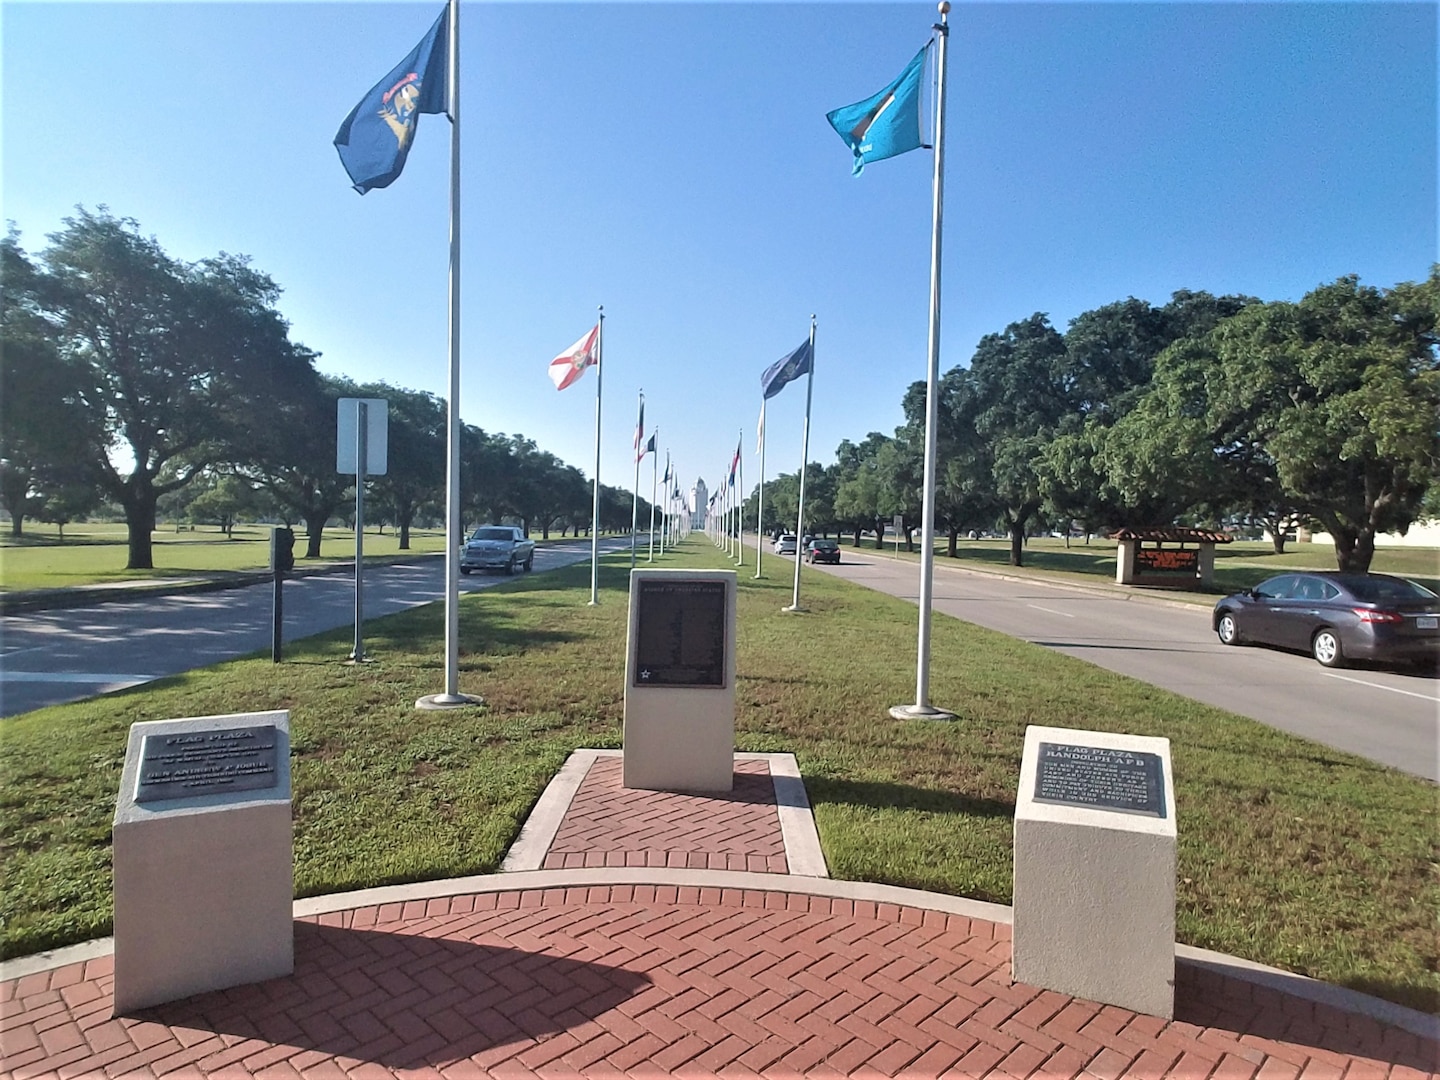 The flags - one for each state of the 50 U.S. states - compliment the landmark Taj Mahal, June 7, 2019, Joint Base San Antonio-Randolph, Texas. The flags on Harmon Drive were officially dedicated by the Air Force Sergeants Association, Chapter 1075, on Feb. 27, 1985.